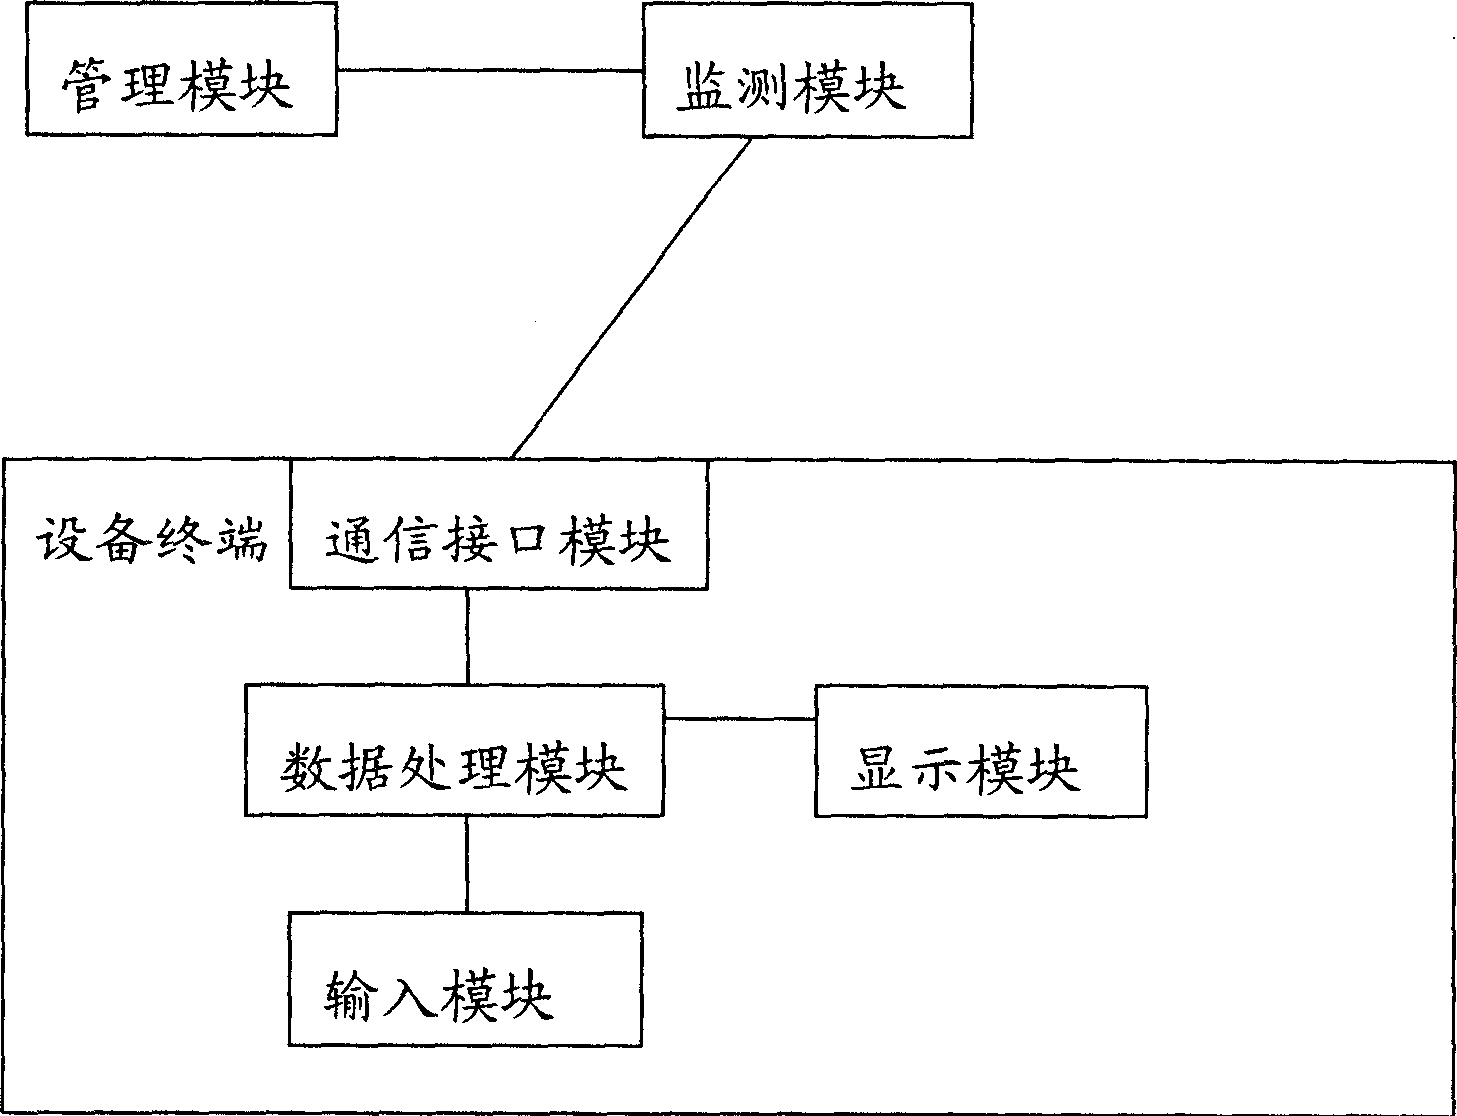 Data terminal monitoring and managing system and method